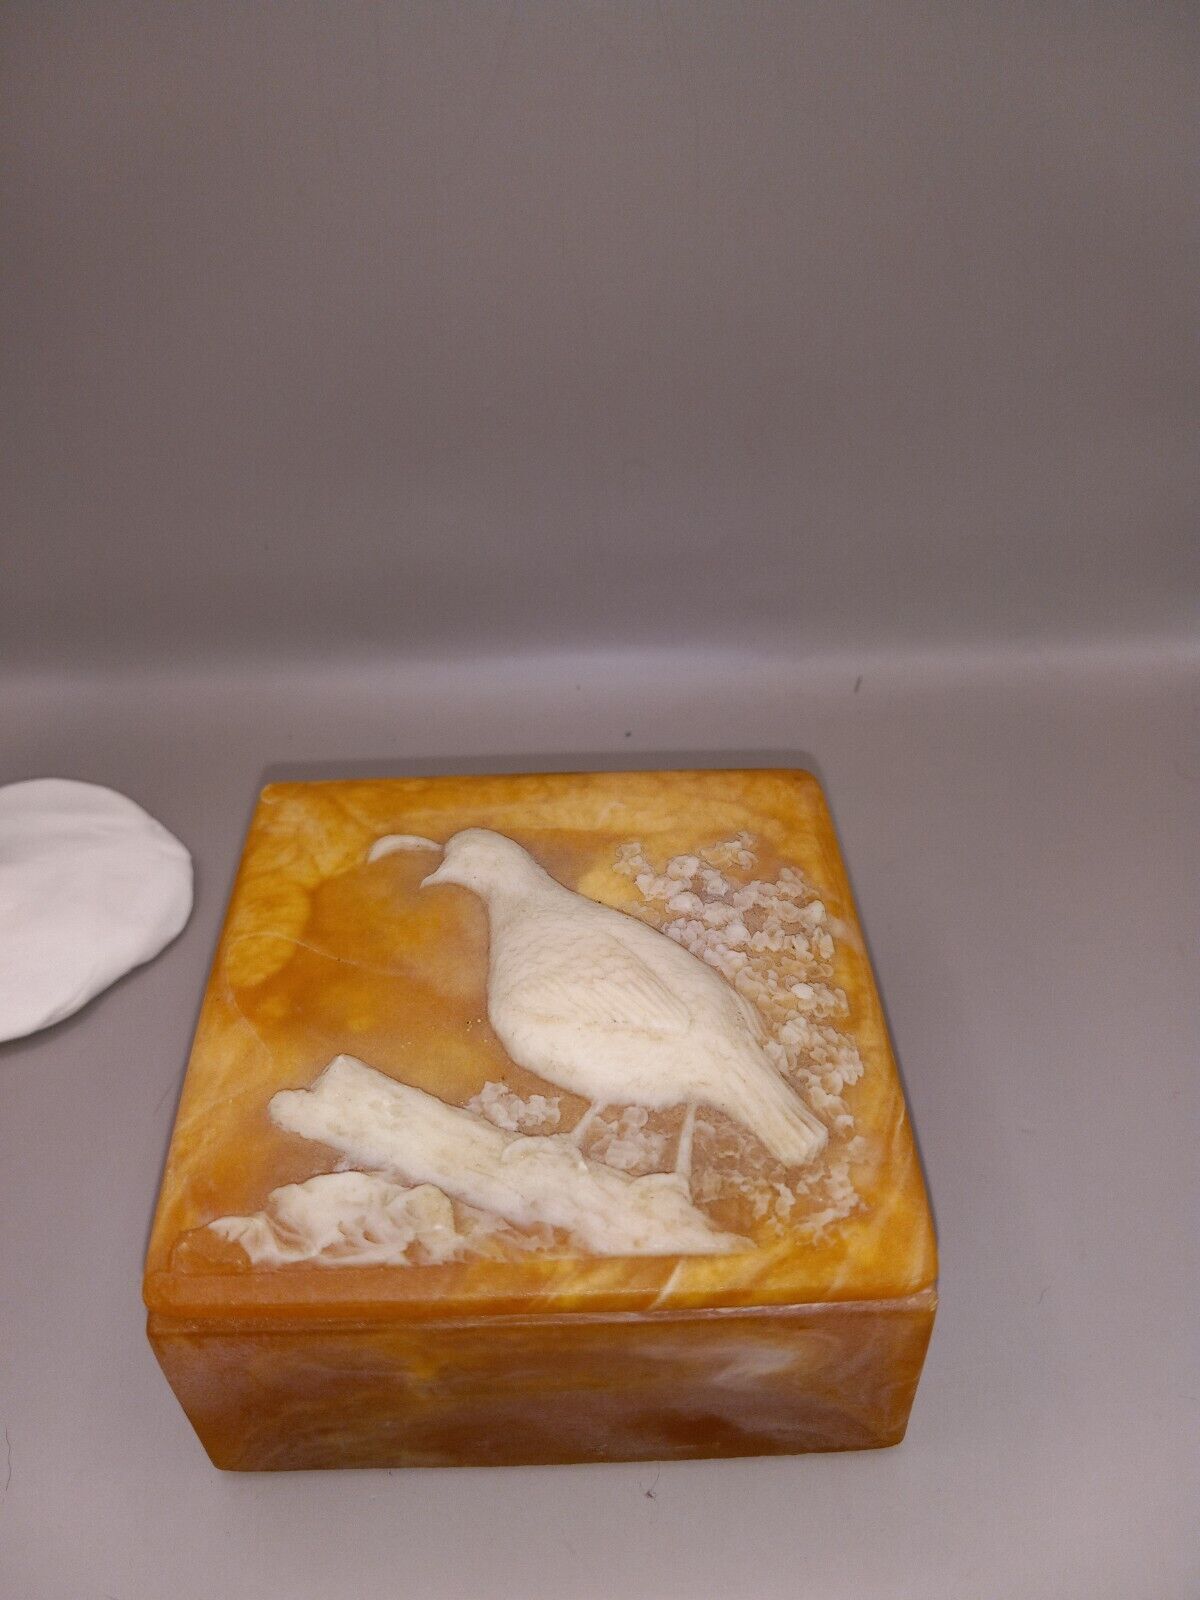 Vintage Incolay Stone Hand Carved in USA Orange Square Trinket Jewelry Box Quail